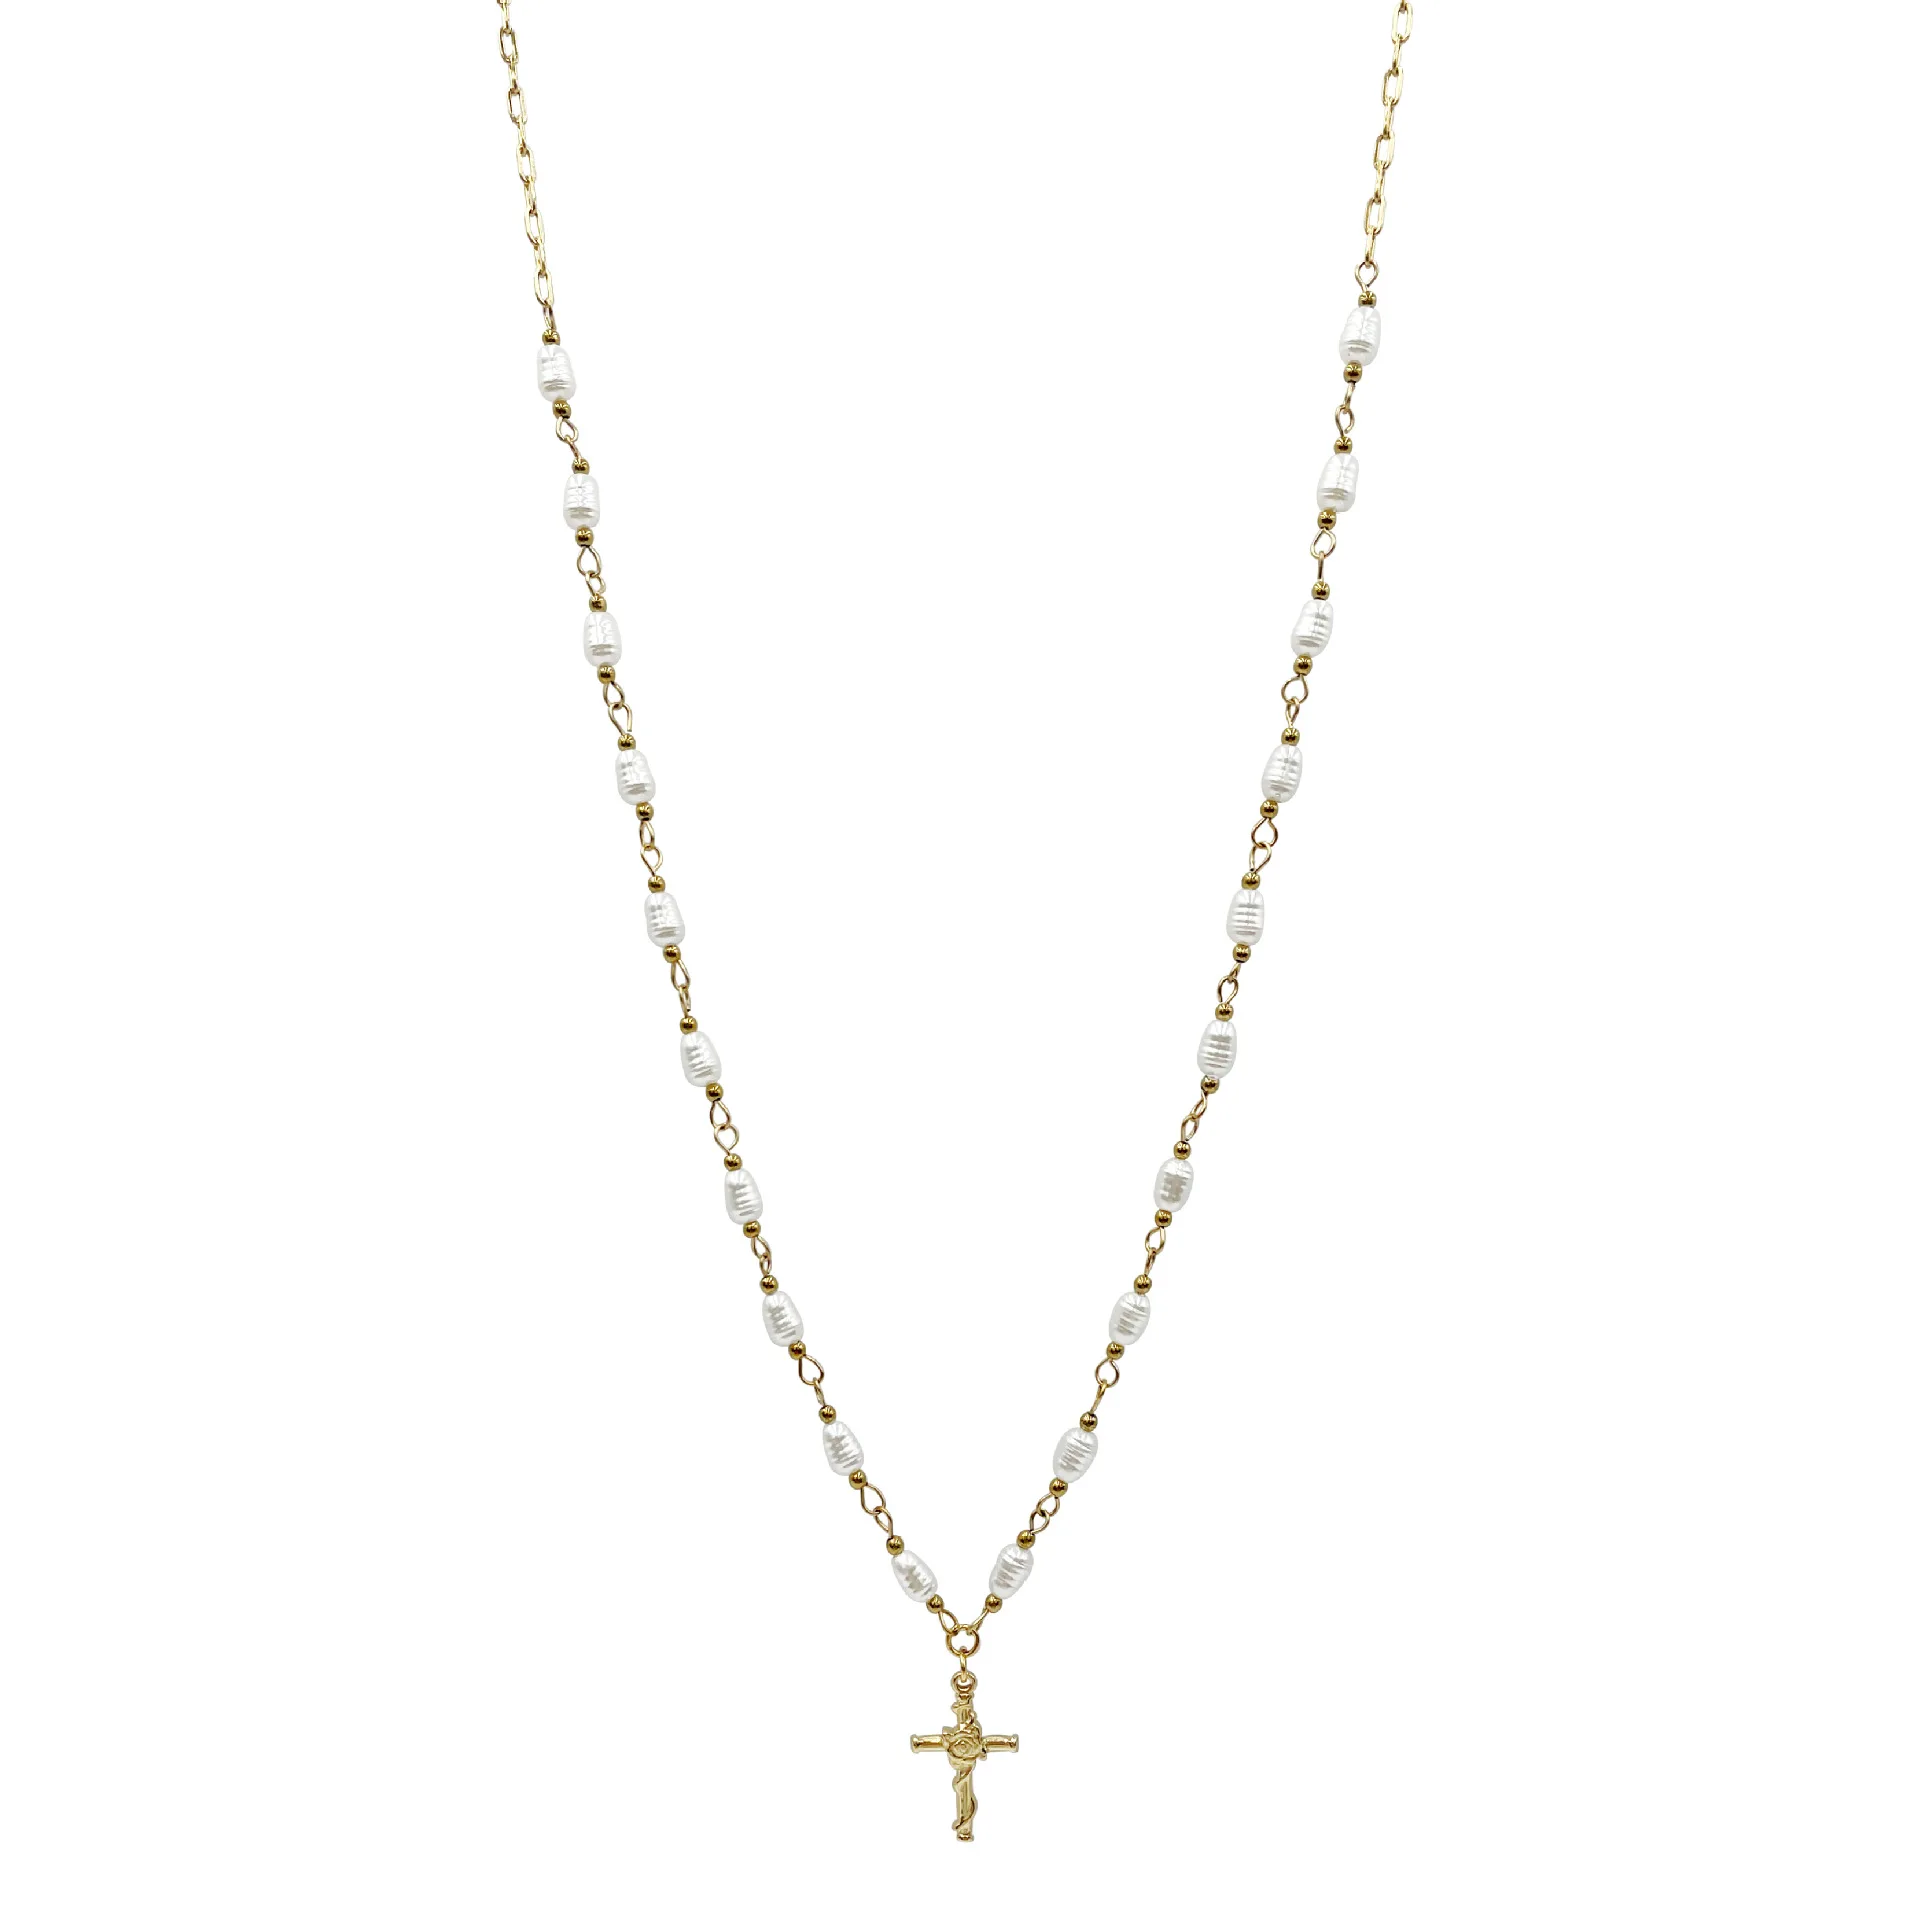 High quality stainless steel gold plated pearl beads cross necklace for women